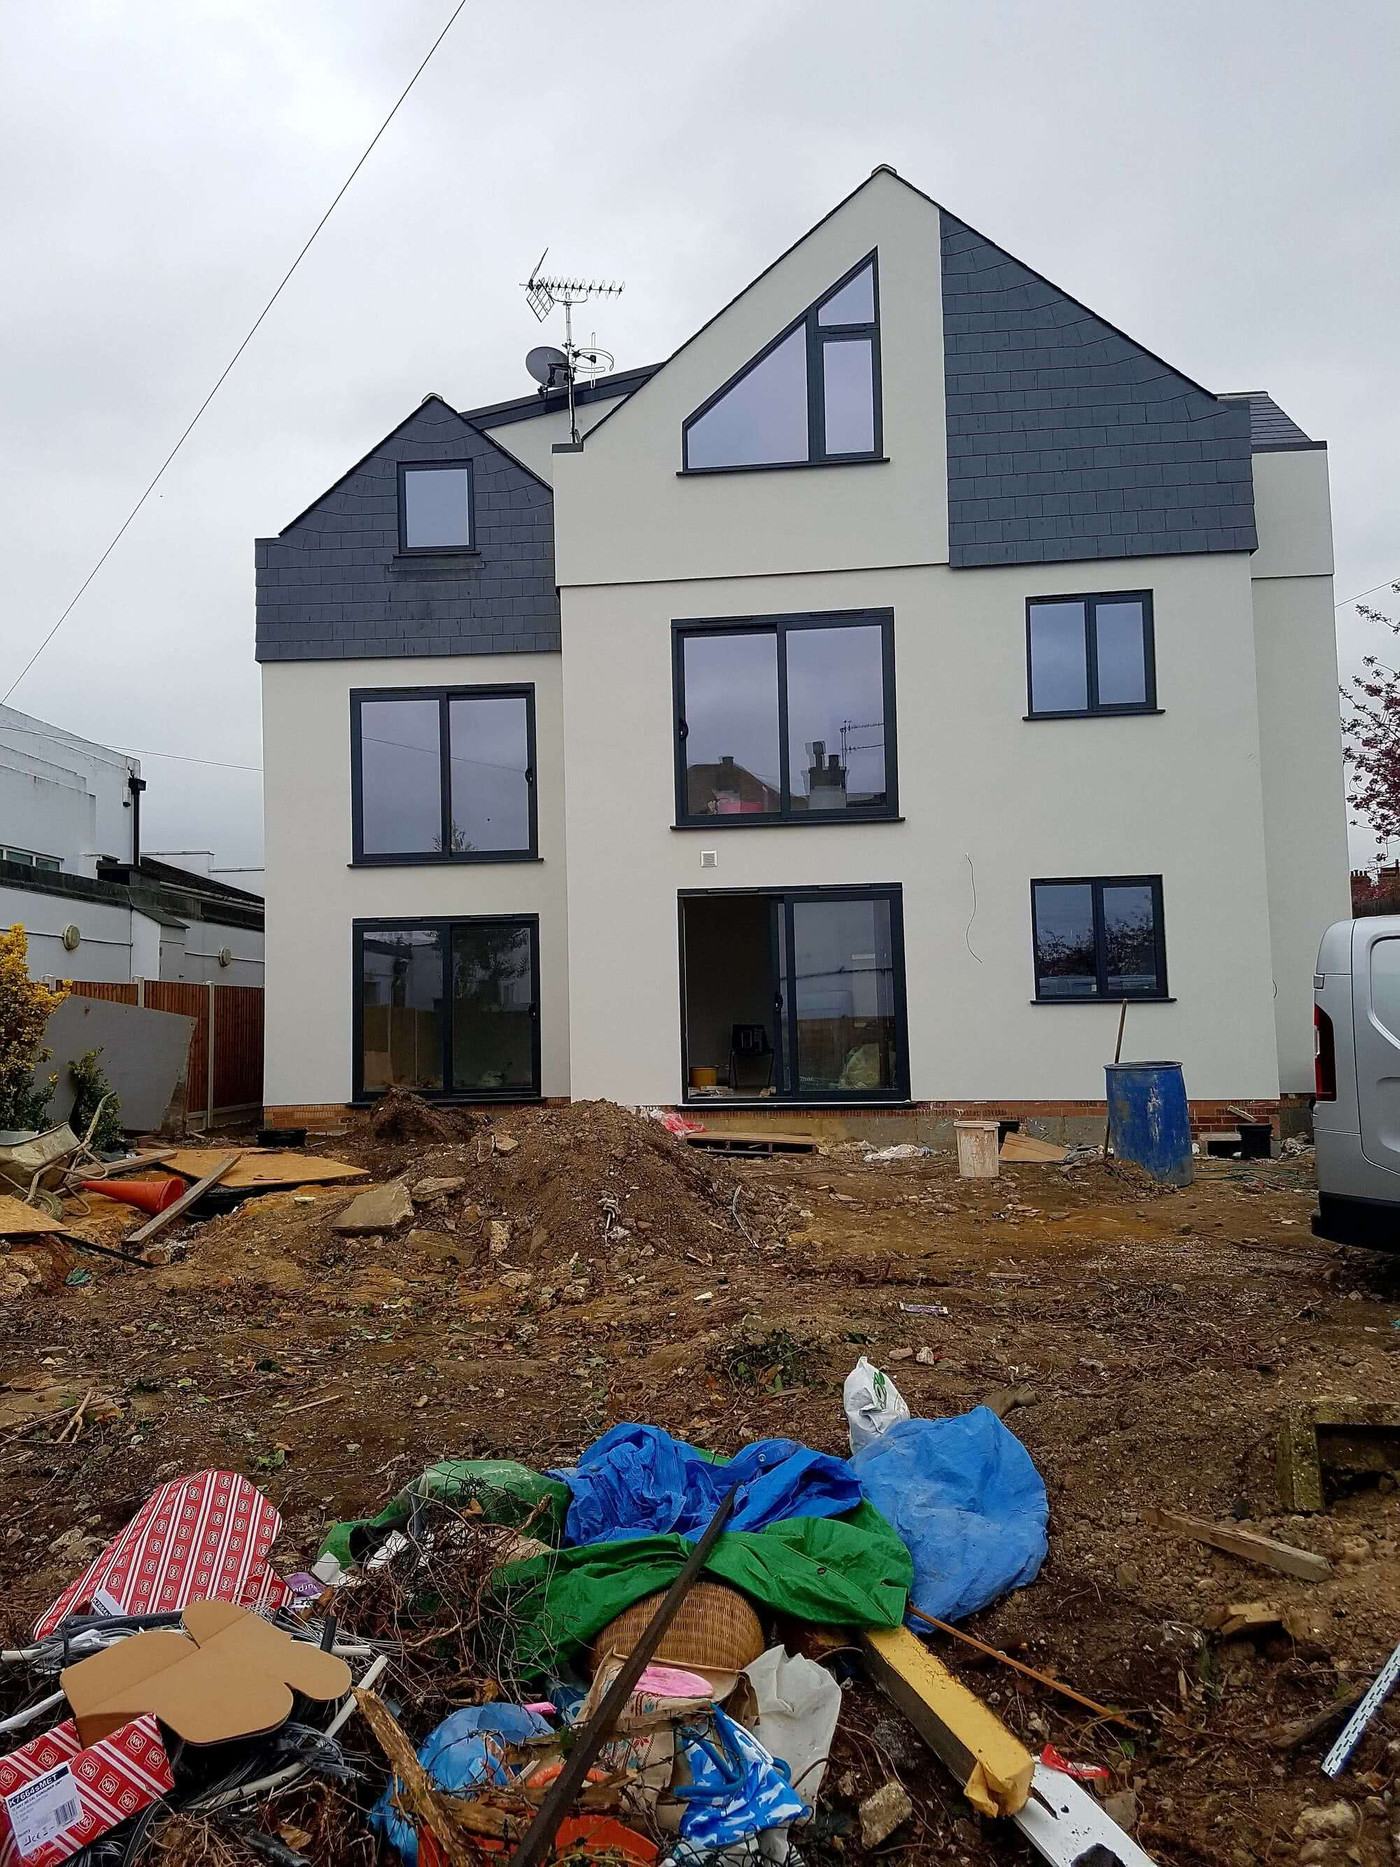 Example of a new build project completed by R. Fulcher & Sons